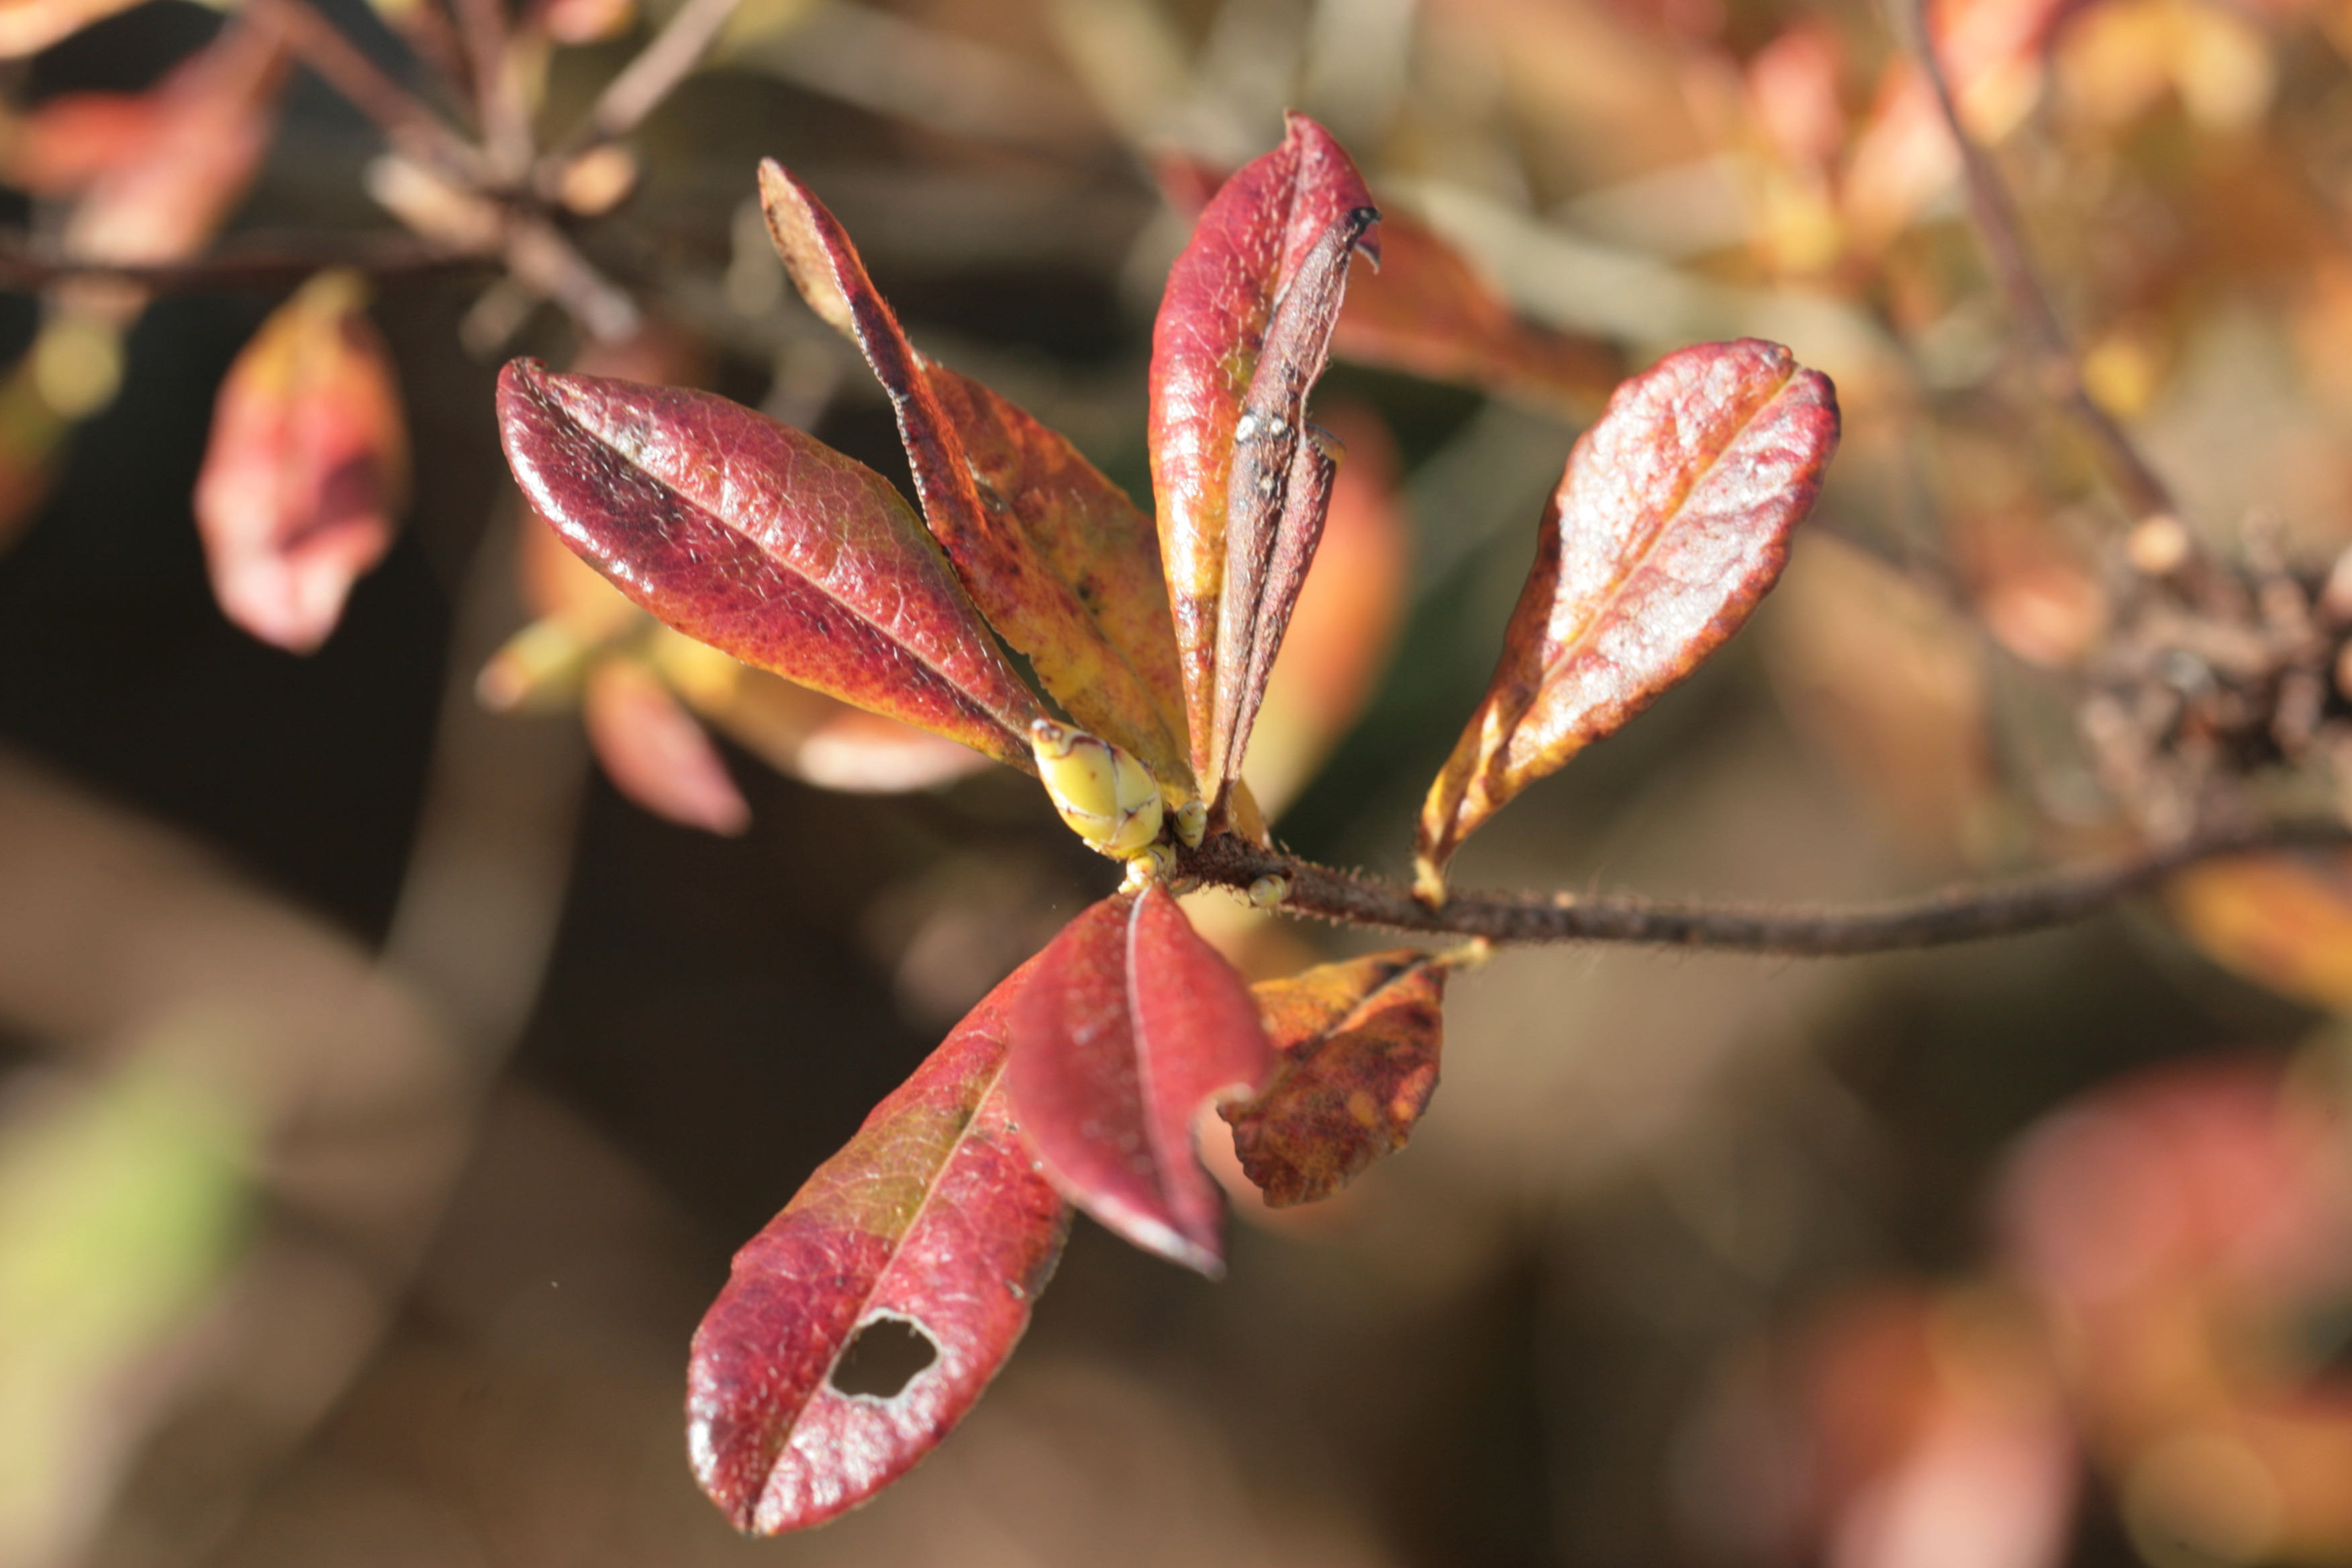 The Scientific Name is Rhododendron viscosum var. viscosum. You will likely hear them called Swamp Azalea, Clammy Azalea. This picture shows the Terminal bud and nice Fall color in early November. of Rhododendron viscosum var. viscosum